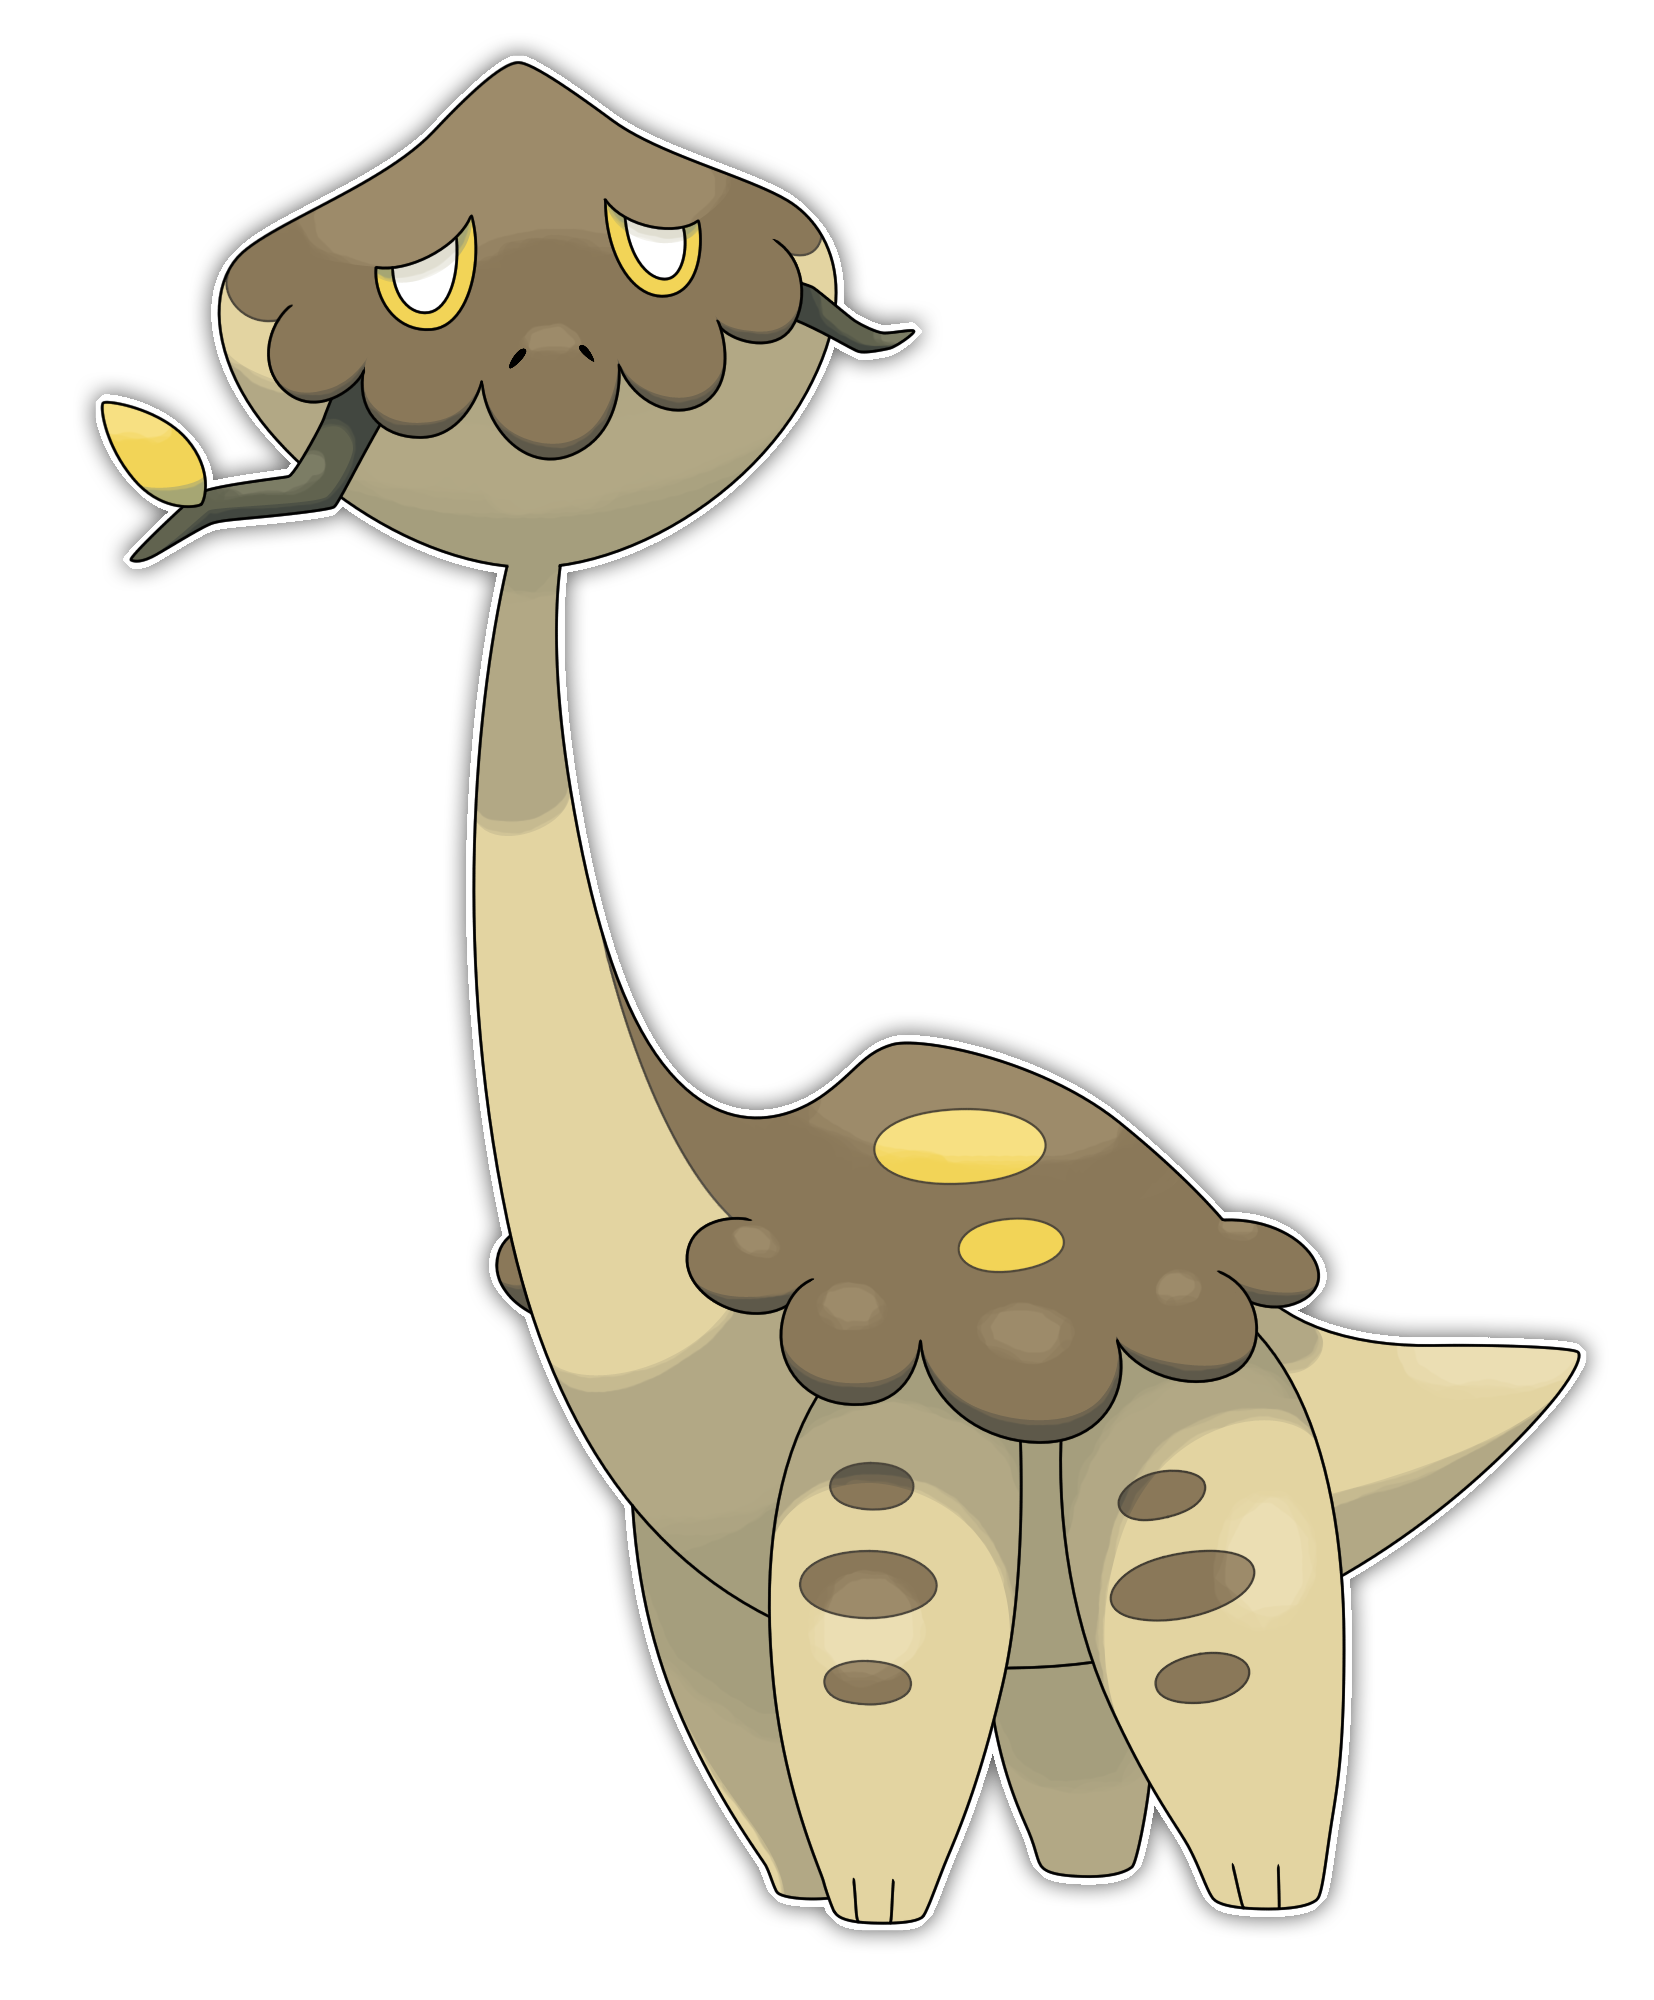 gigaraffe__treebrowser_fakemon_by_smiley